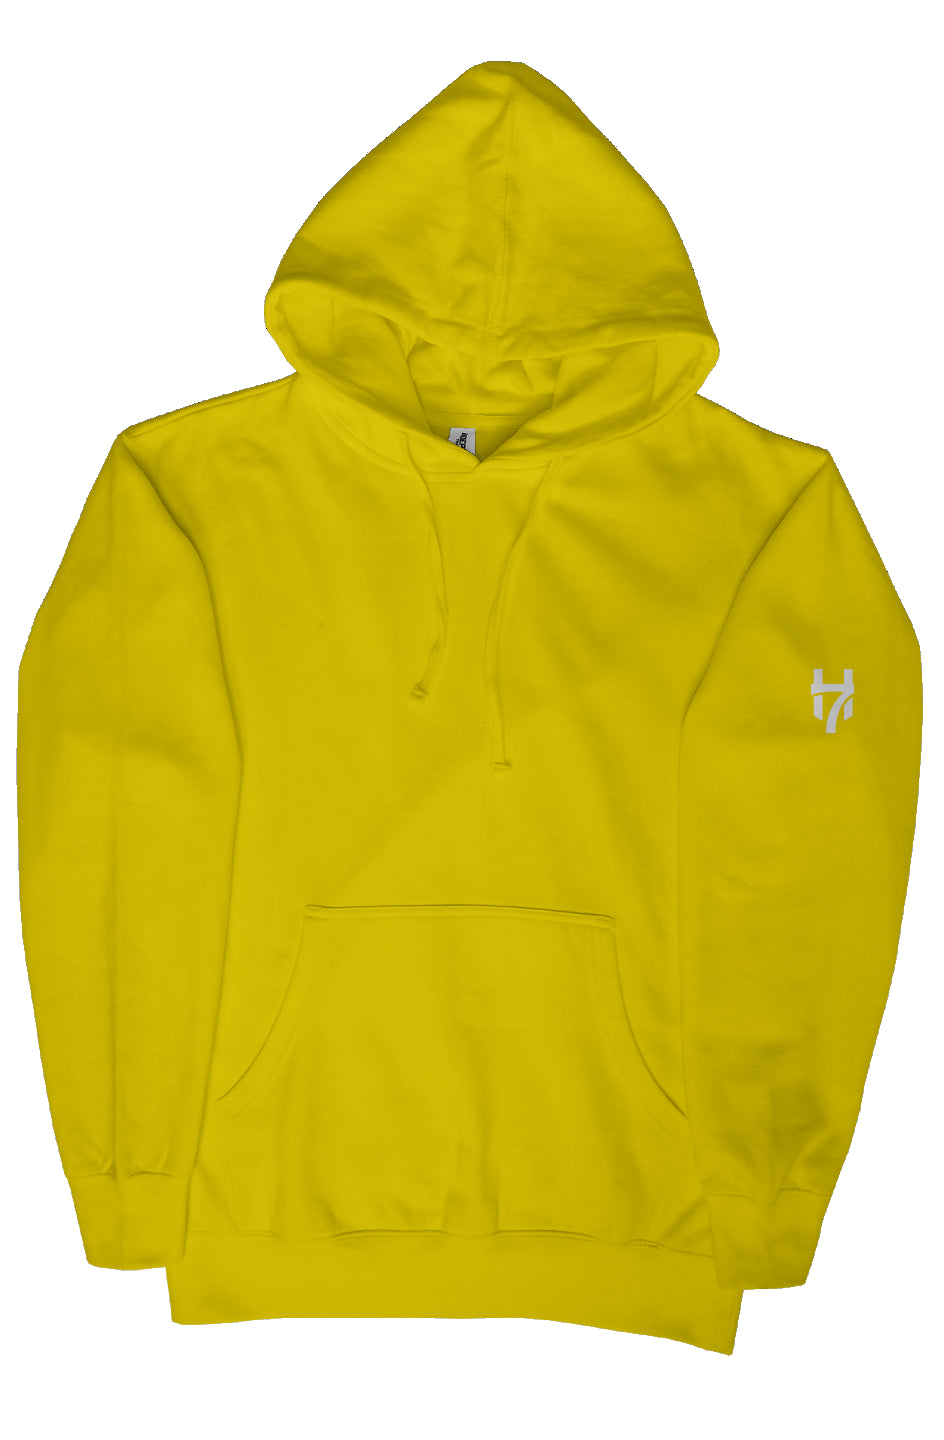 H7 Gold independent pullover hoody